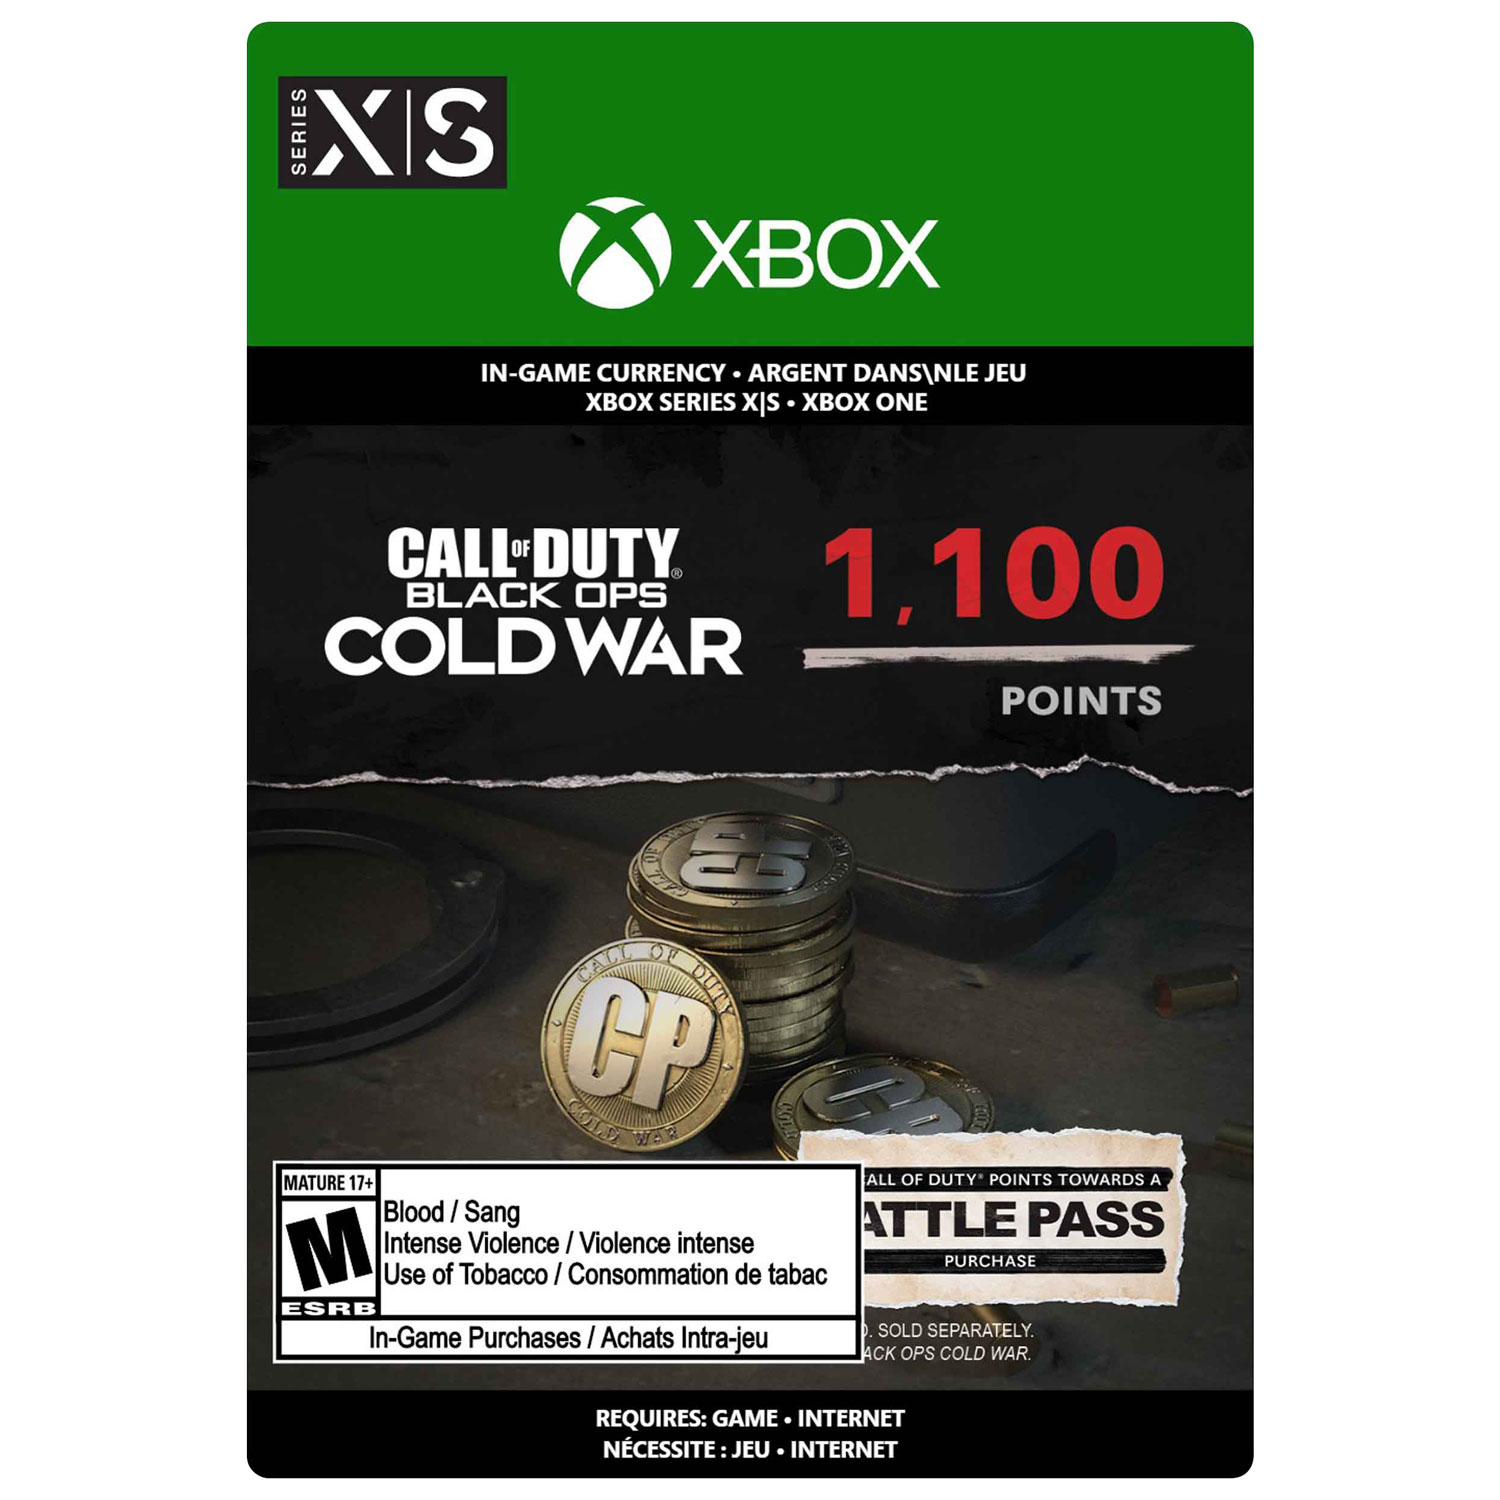 Call of Duty: Black Ops Cold War - 1100 COD Points (Xbox Series X|S / Xbox One) - Digital Download